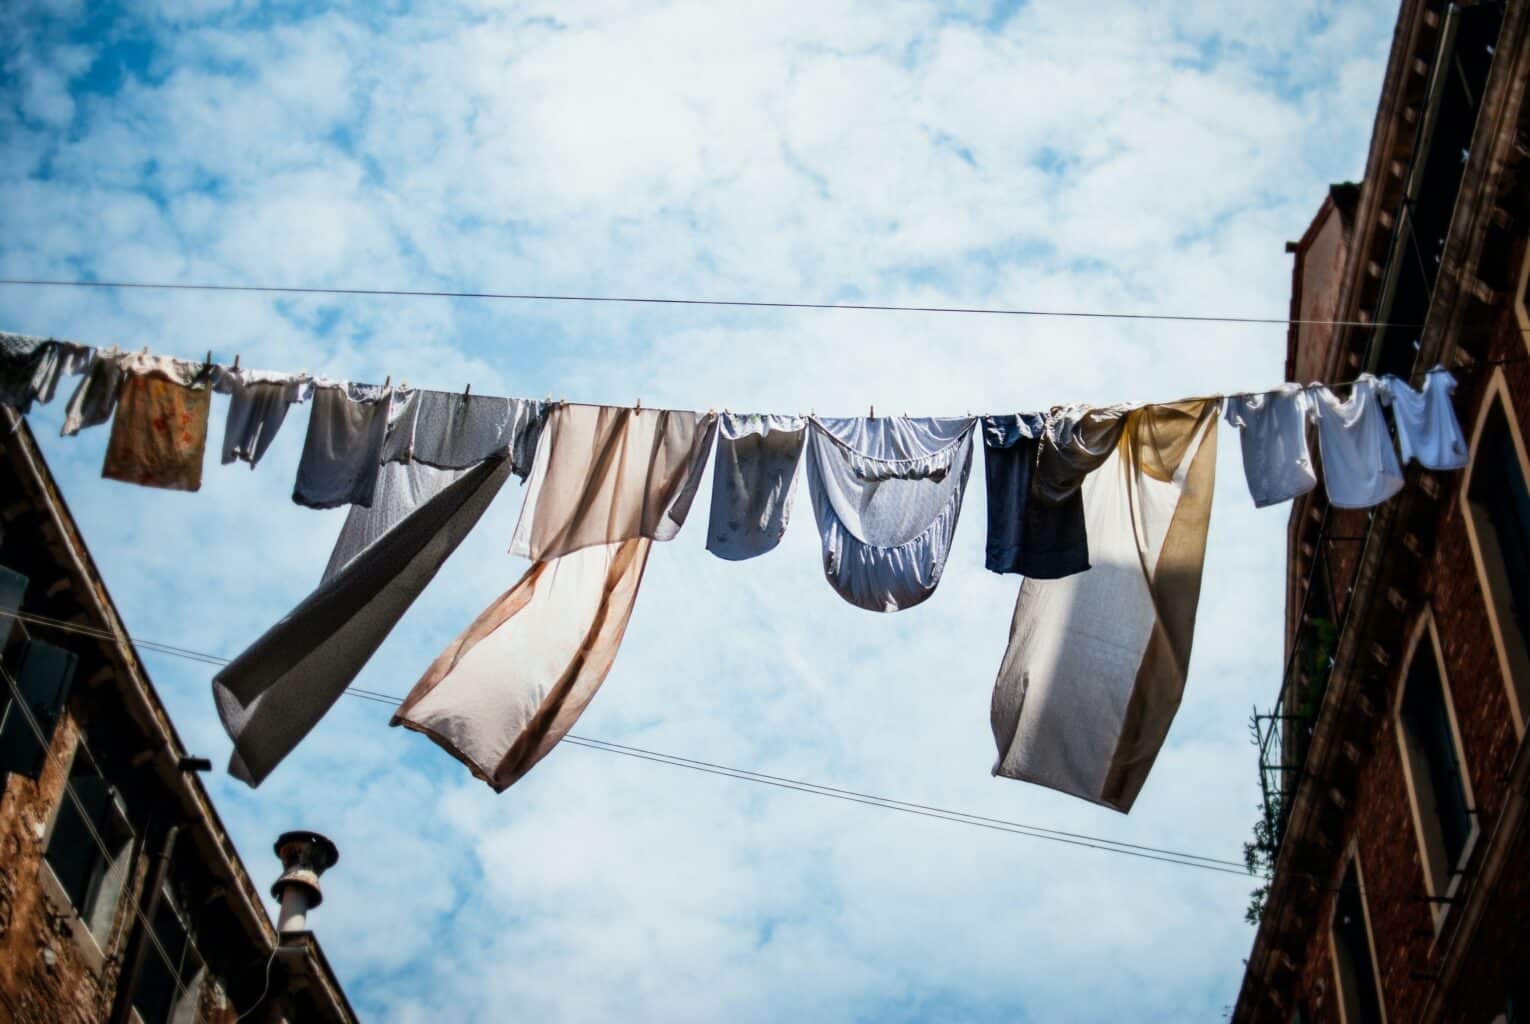 Clothes drying on a line in Venice, Italy, captured by a global traveler.